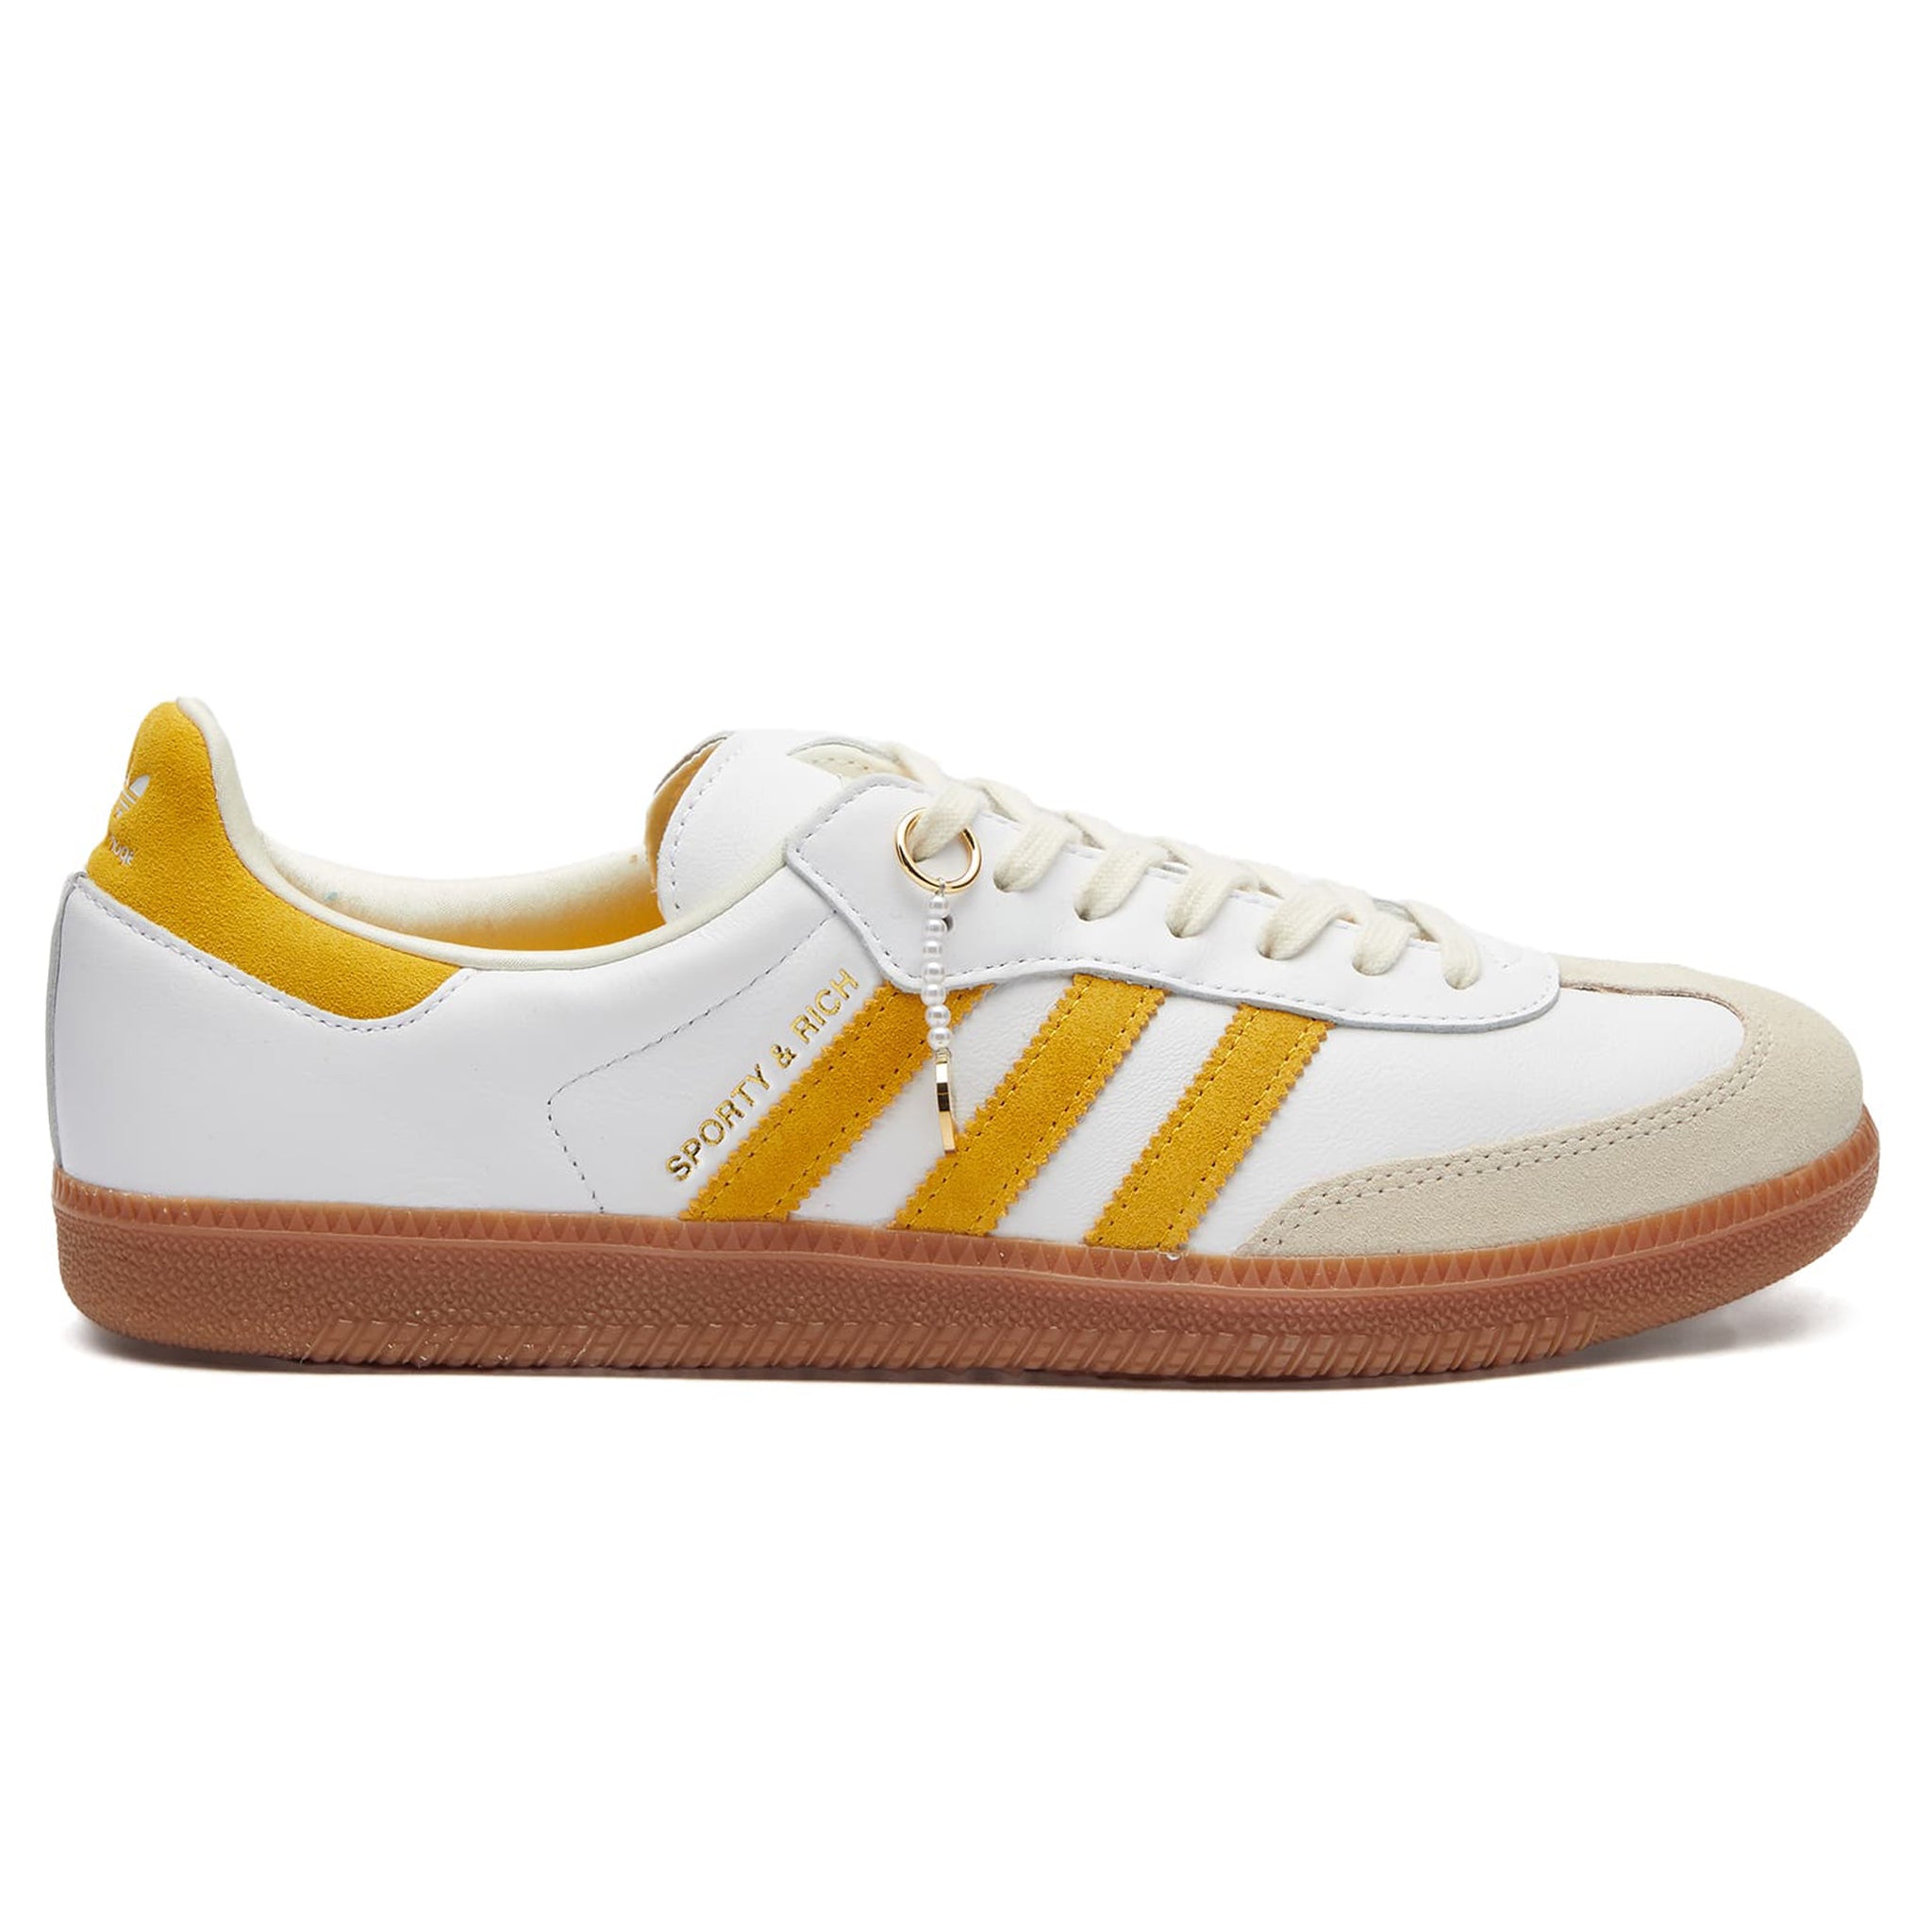 Side view of Adidas Samba OG Sporty & Rich White Bold Gold IF5661